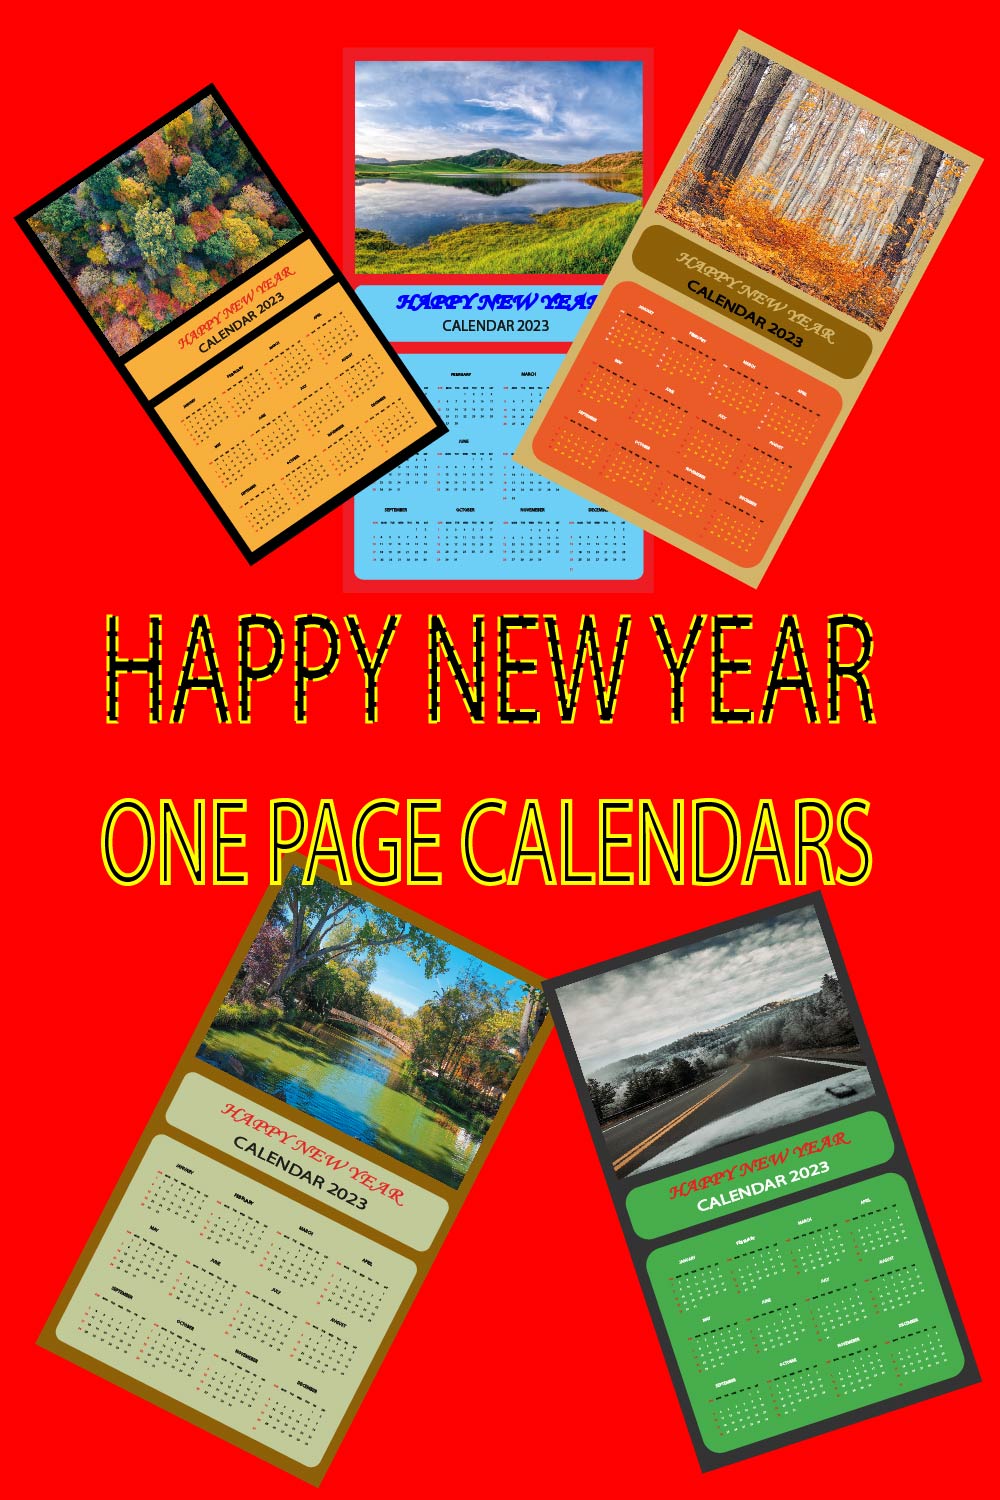 Happy New Year Beautiful One Page Calendars Design pinterest image.